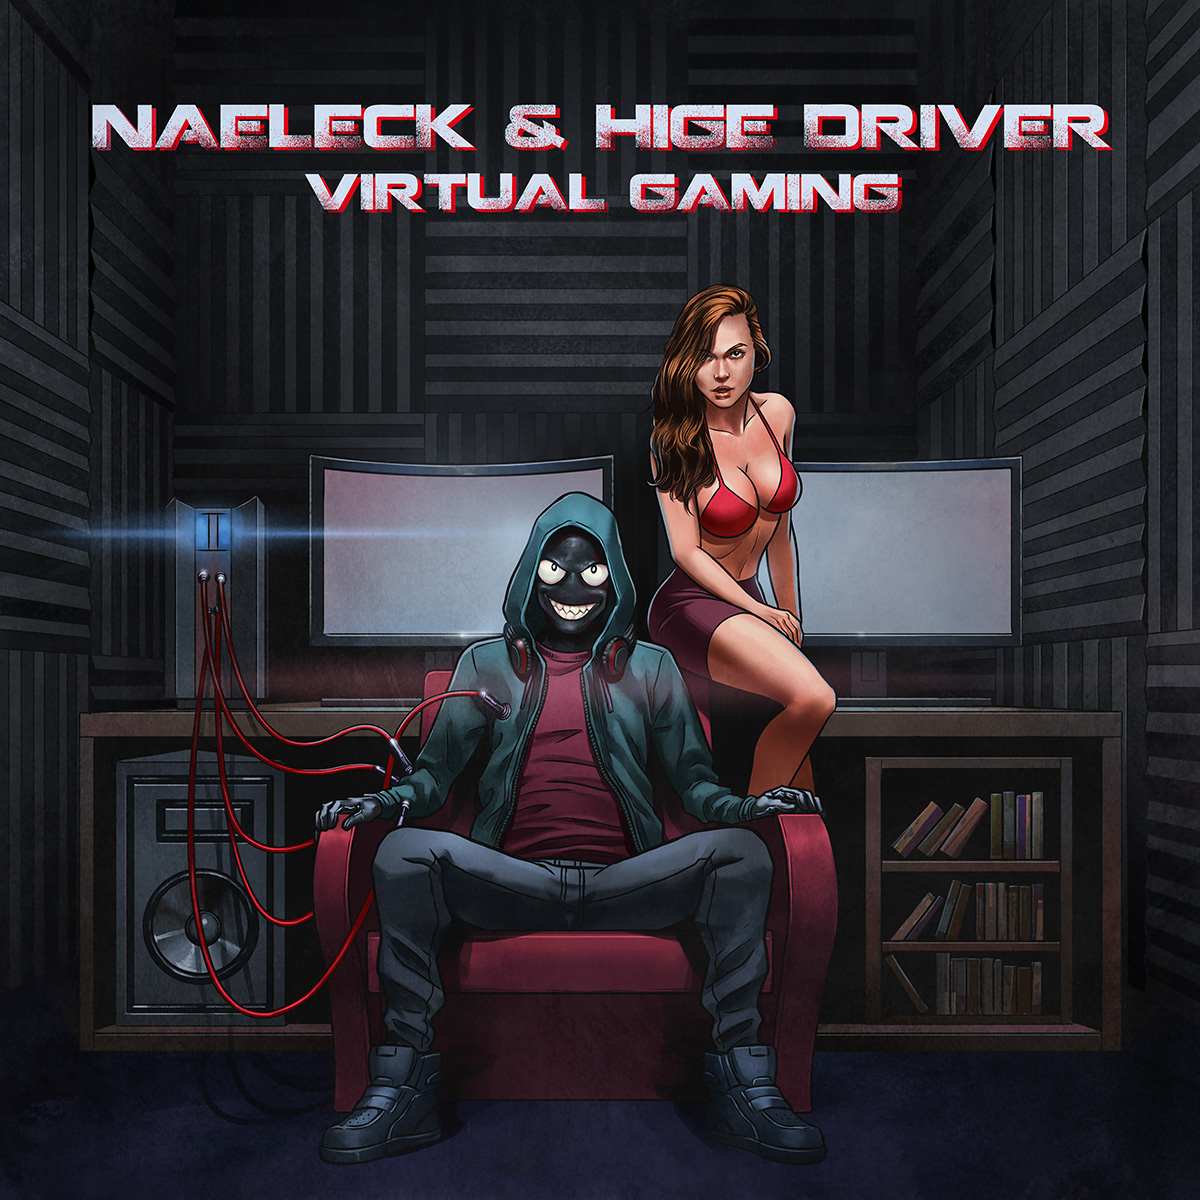 Naeleck & Hige Driver Release “Virtual Gaming” Music Video